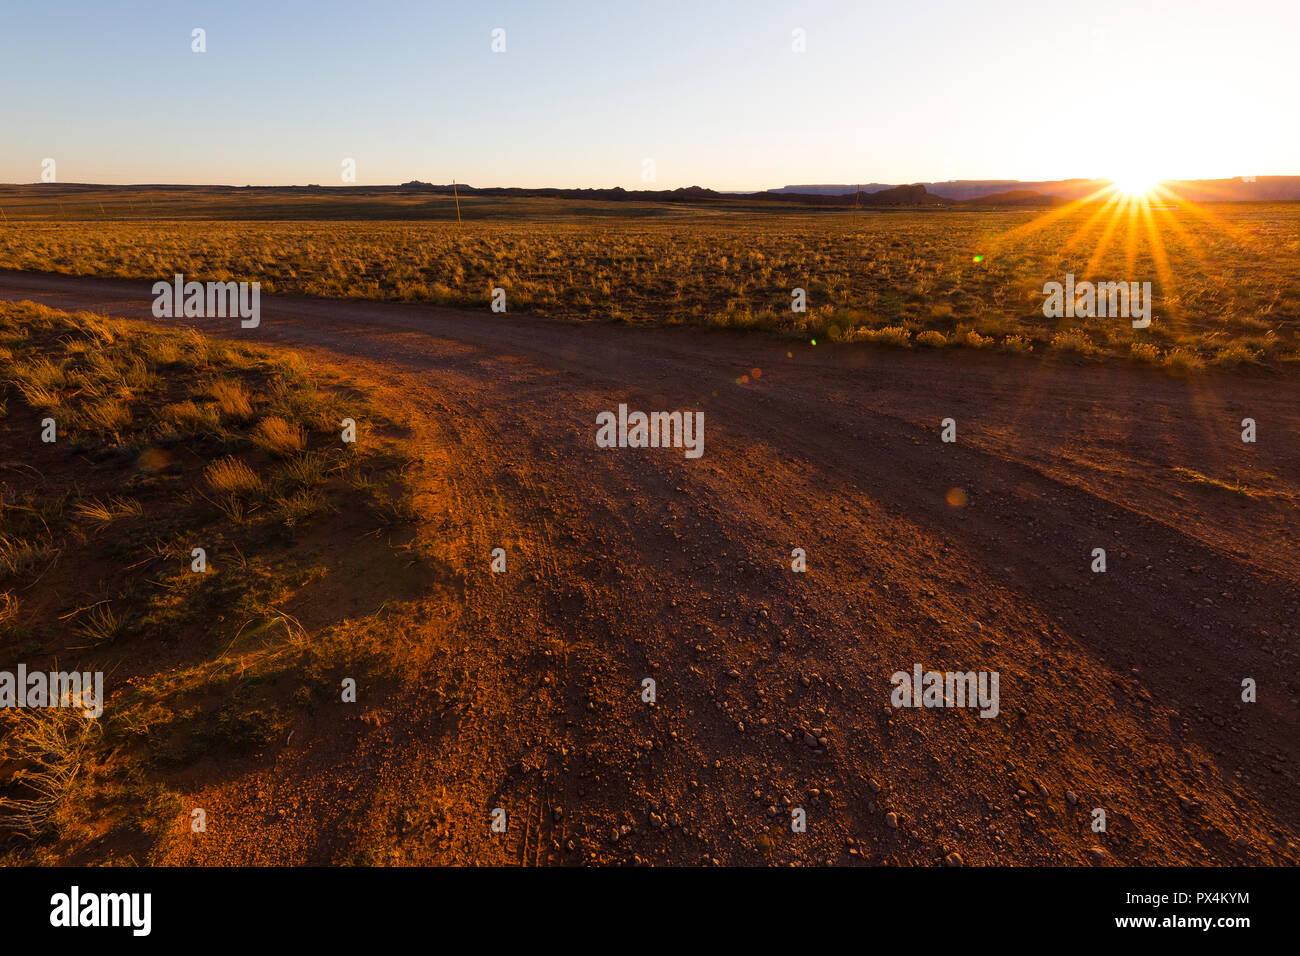 Shash Dine Navajo campsite, AZ, USA. The sun sets over a curve in a dirt track in the desert. Stock Photo